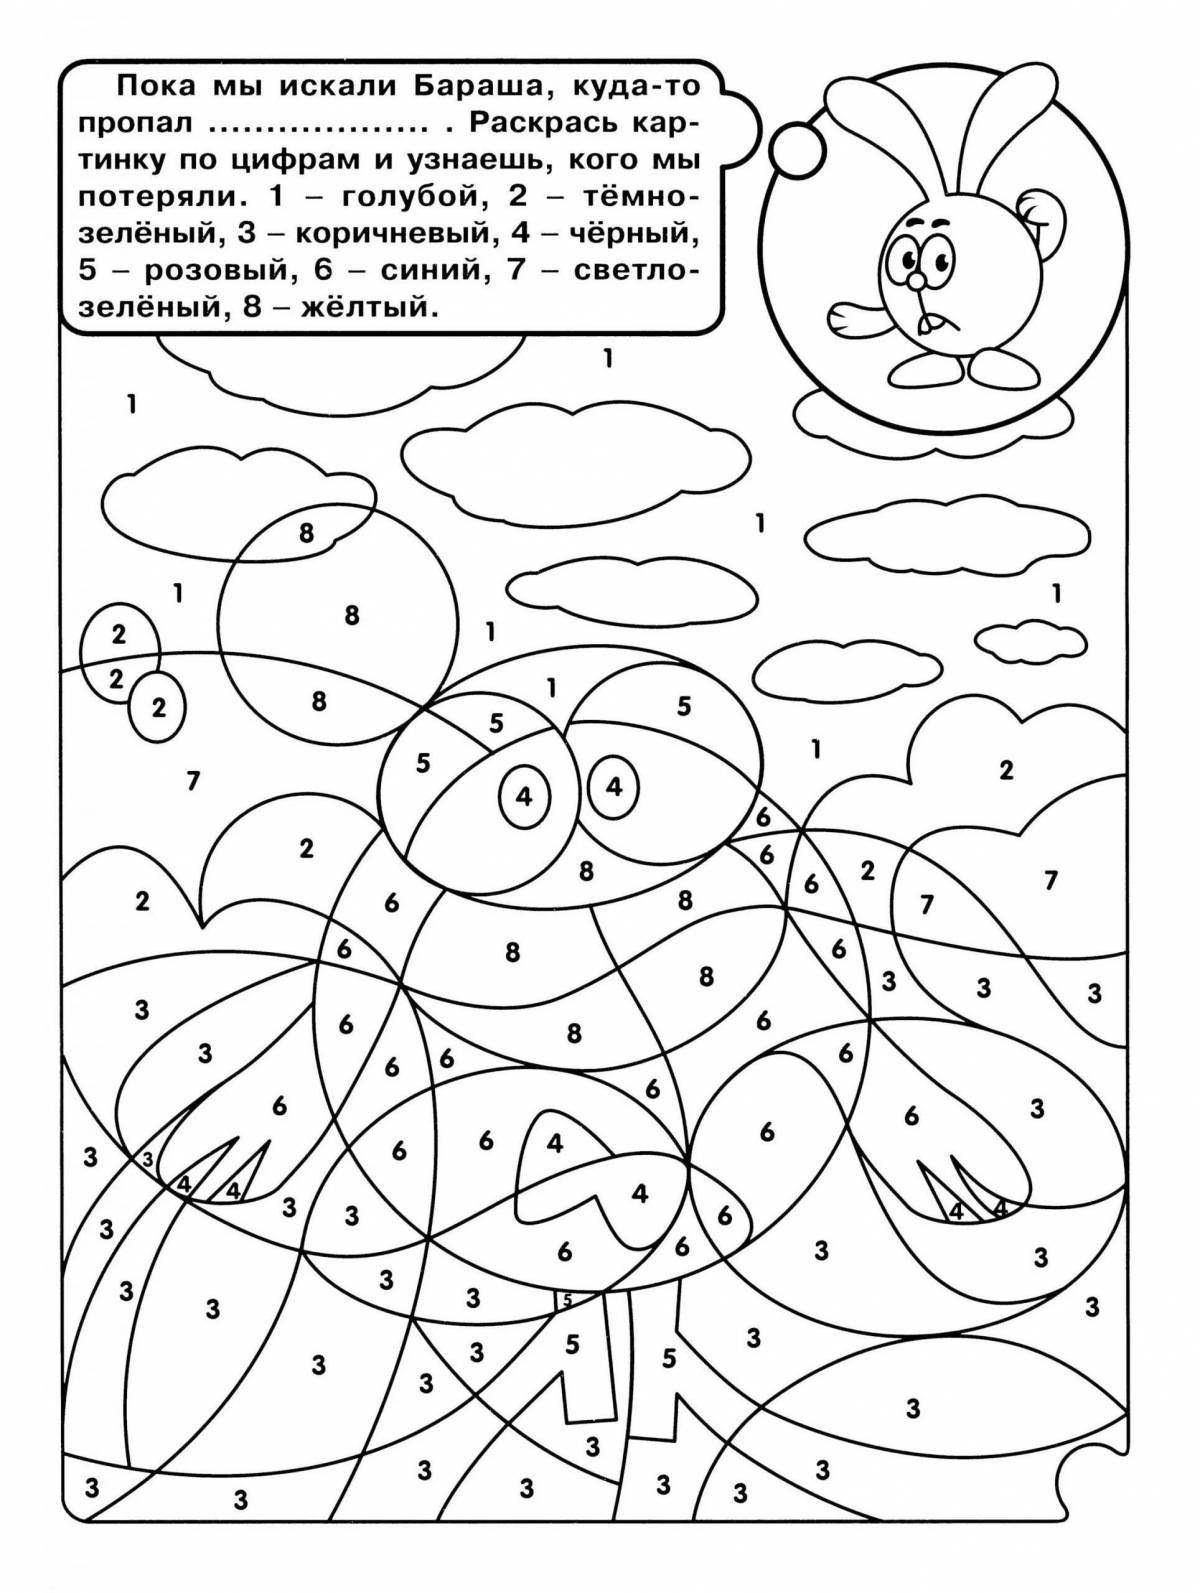 Fun coloring book for 8-9 year olds